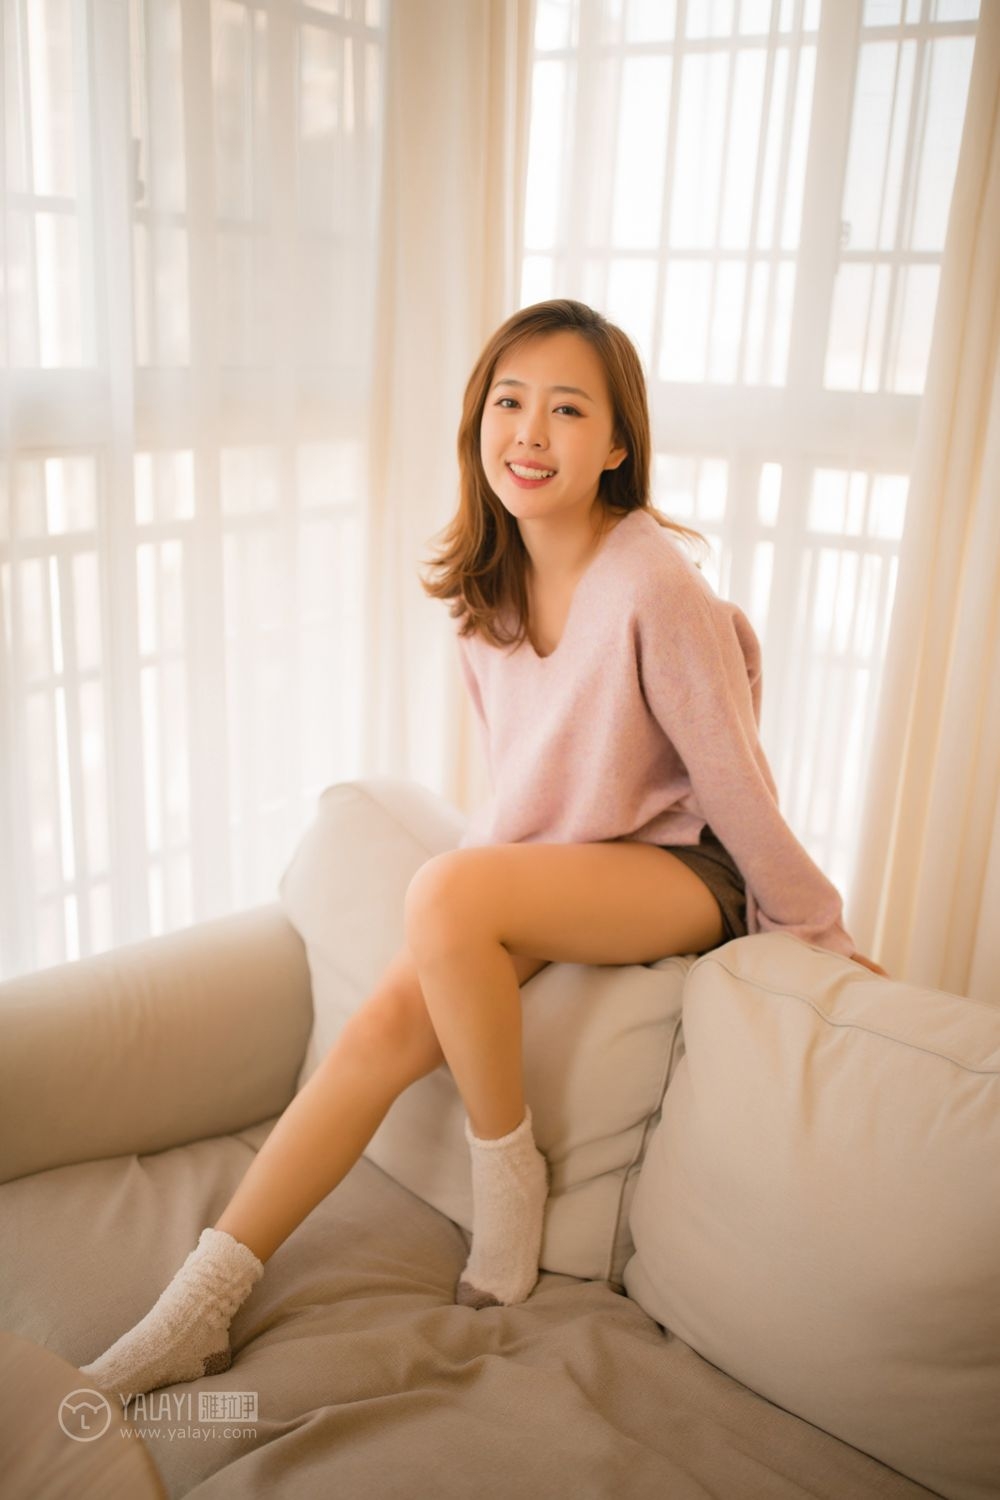 Young girl 26 years old beautiful tenant smiling sexy legs dynamic private portrait(10)